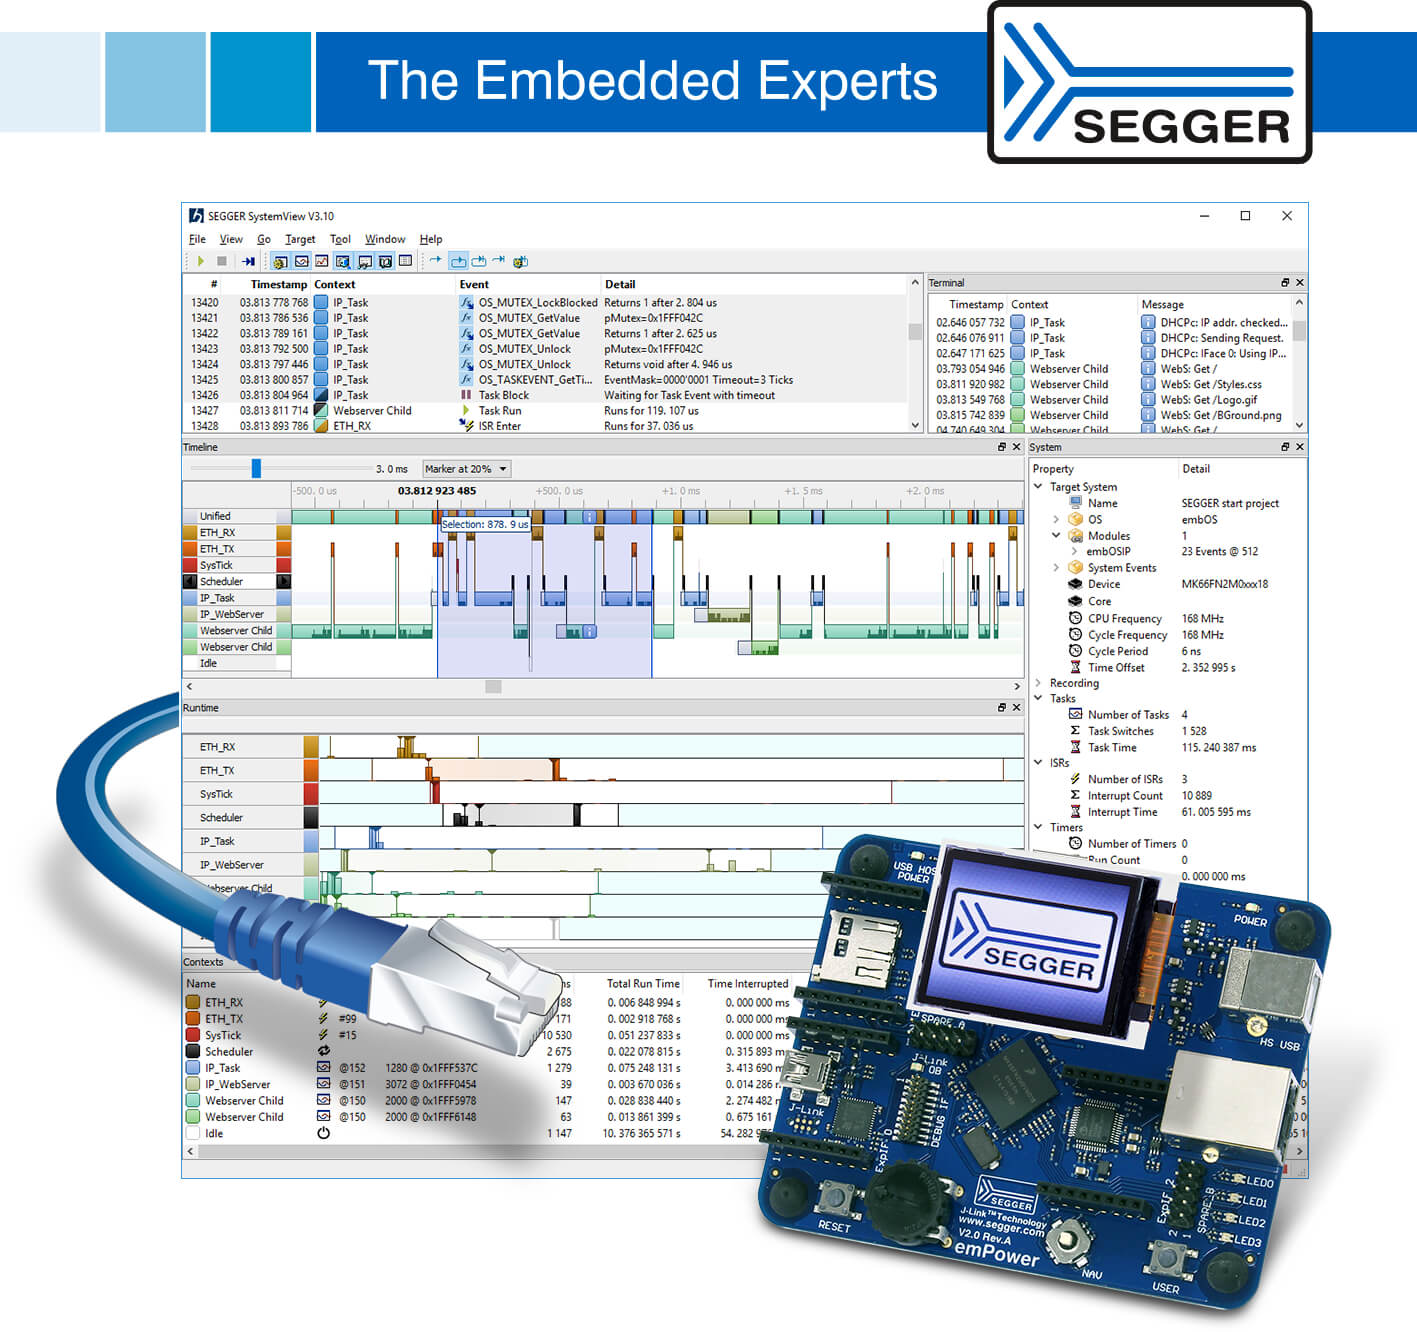 SEGGER’s SystemView adds data acquisition via UART and TCP/IP